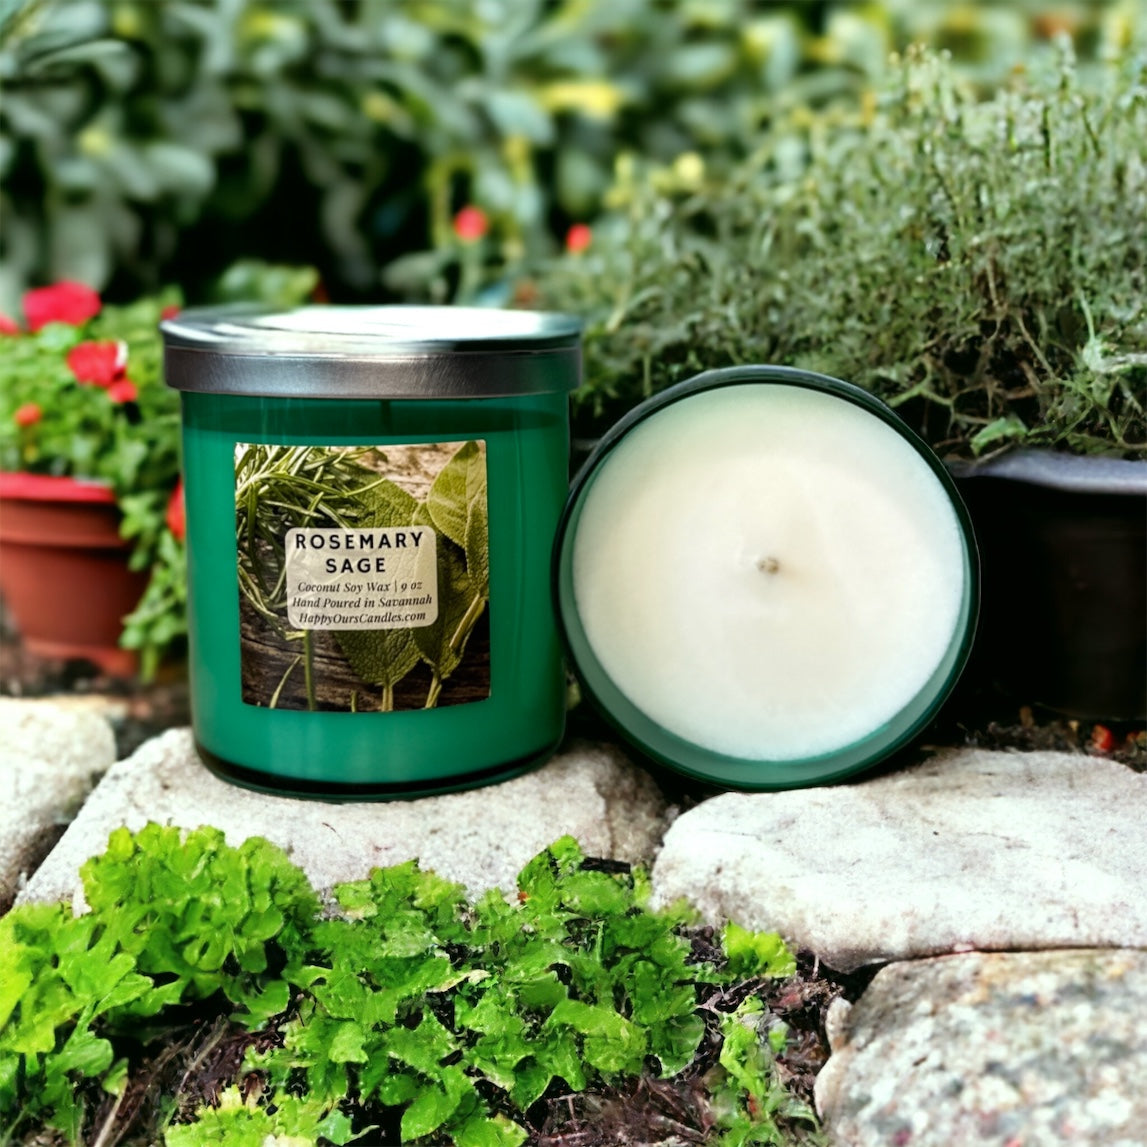 Rosemary Sage Scented Candle 9 oz